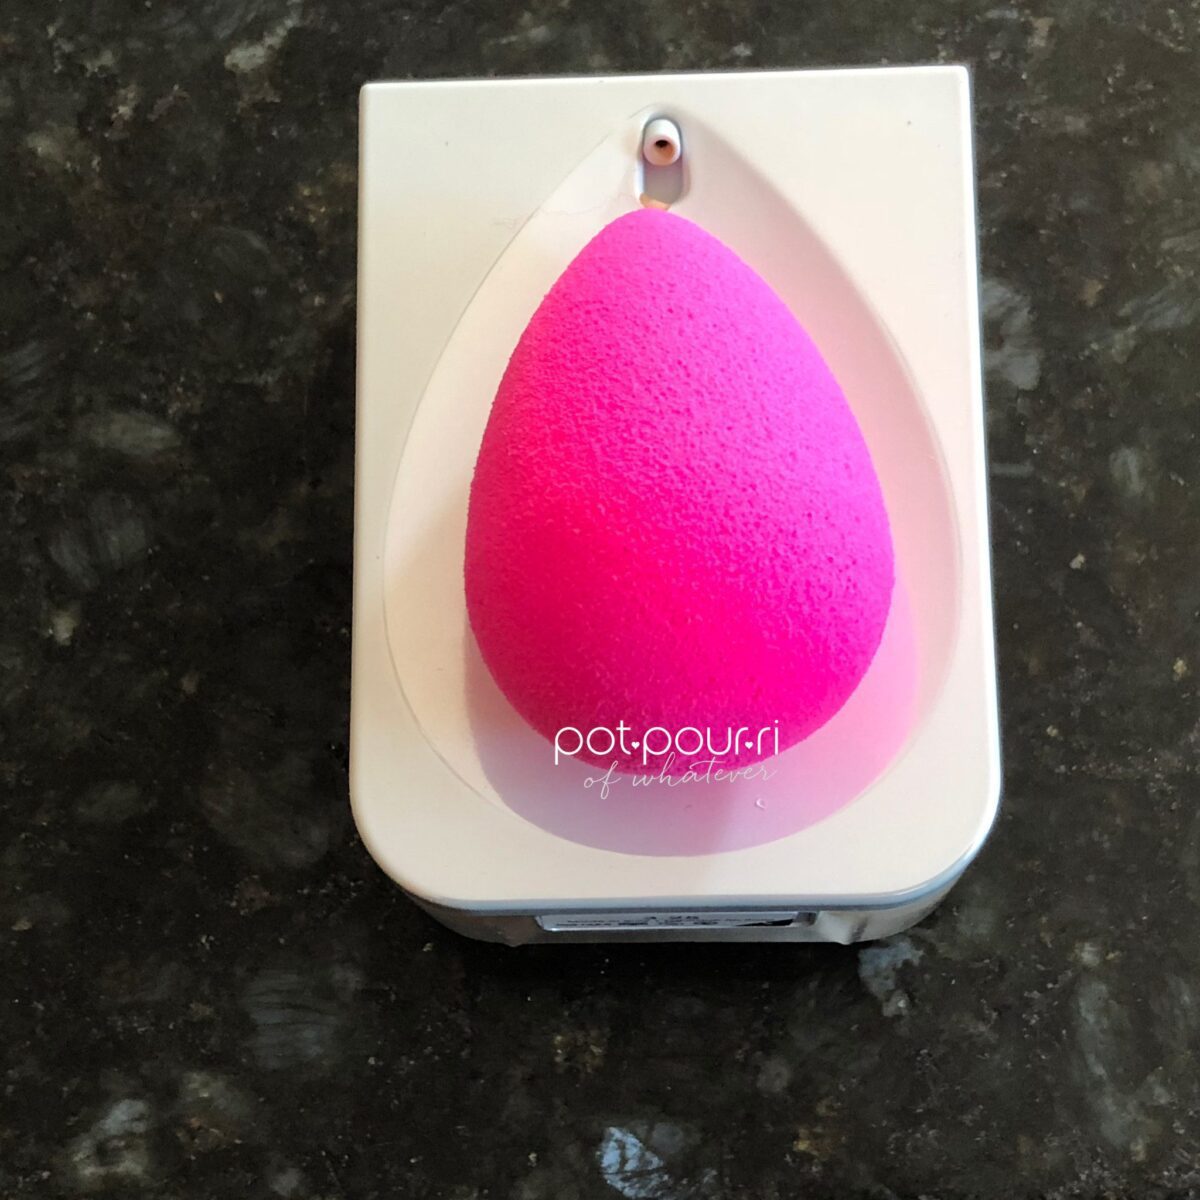 BEAUTY BLENDER FITS INTO EGG-SHAPED WELL